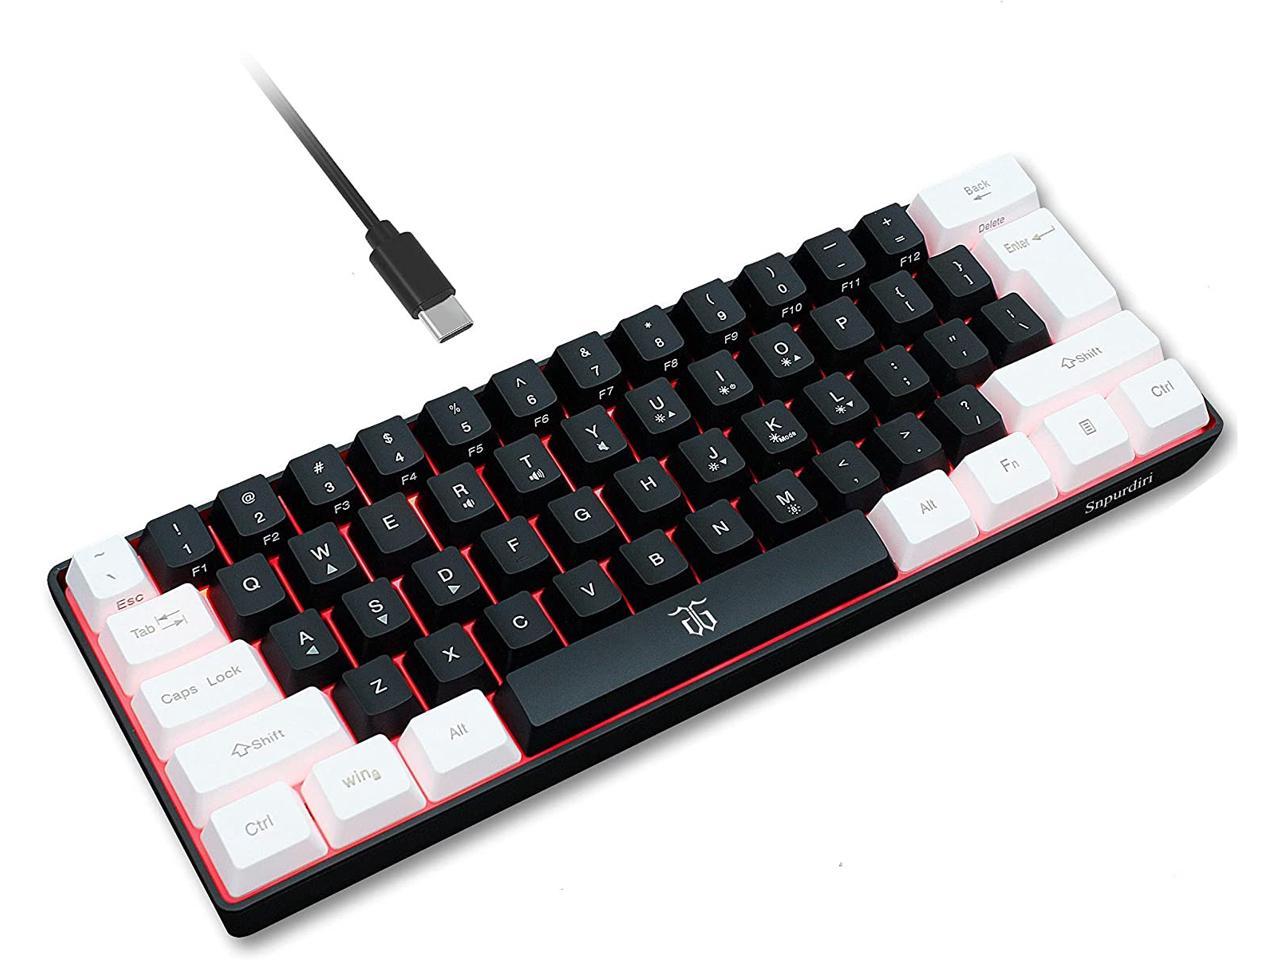 Snpurdiri 60% Wired Gaming Keyboard True RGB Mechanical Feeling  Ultra-Compact Mini Keyboard with Detachable Cable White and Black Color